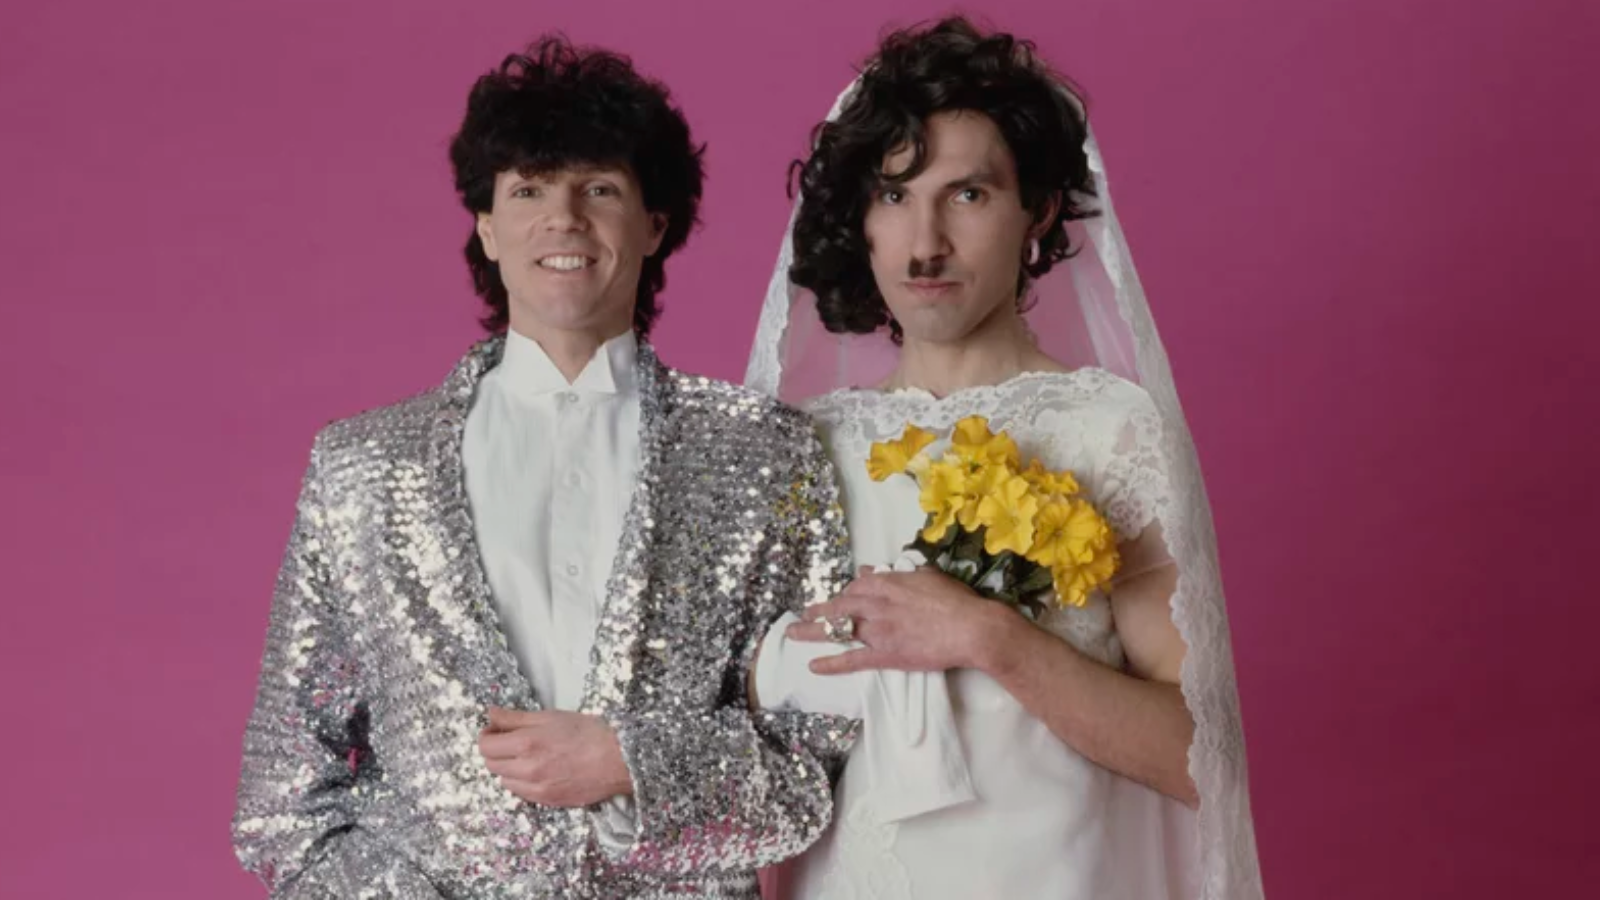 6 Best Sparks Albums to Understand Their Discography Discogs Digs